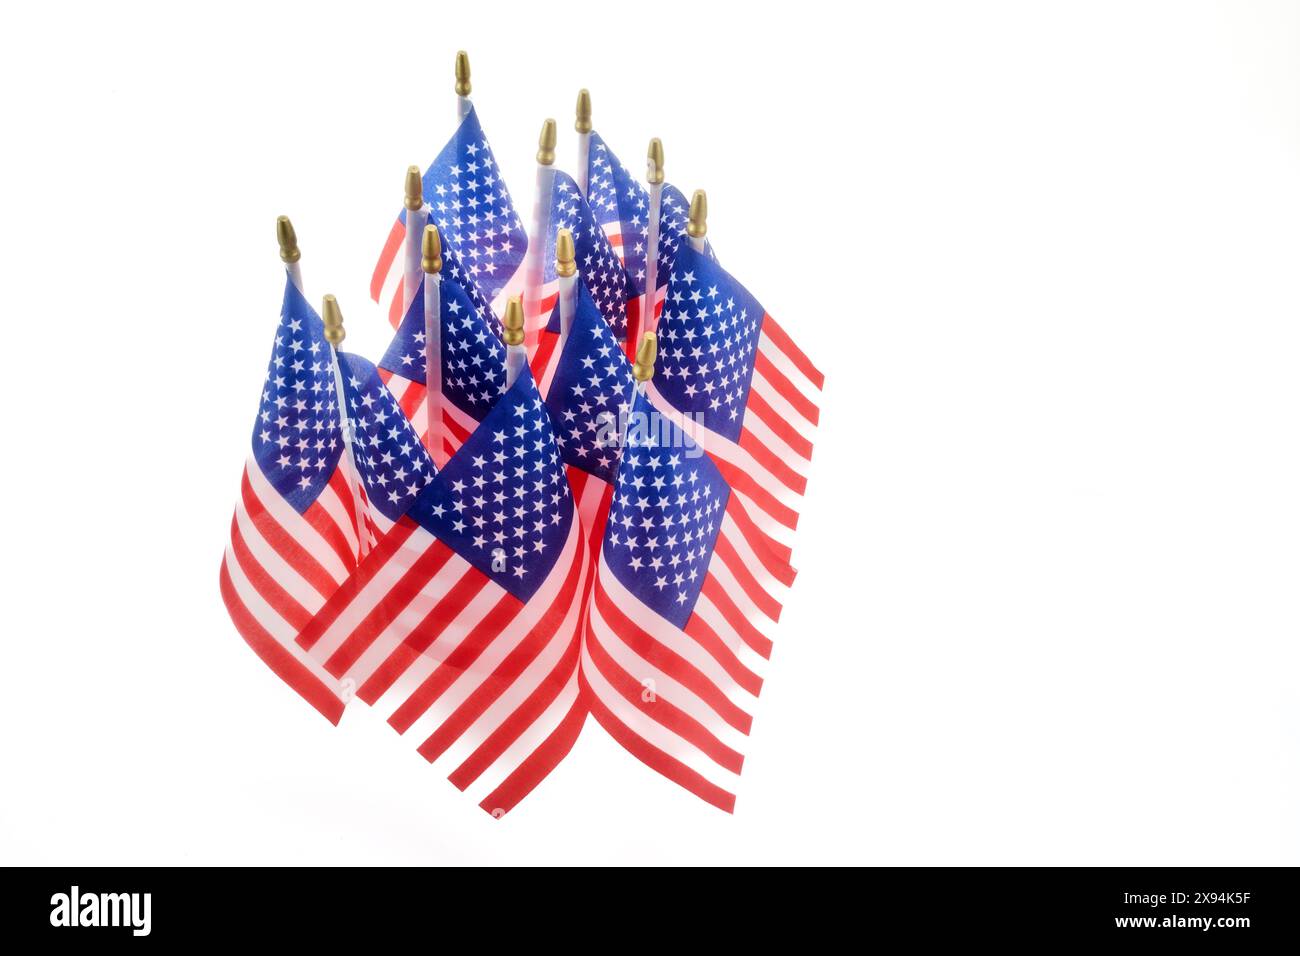 Memorial or America independence day. Row of American Flags on White Background Stock Photo